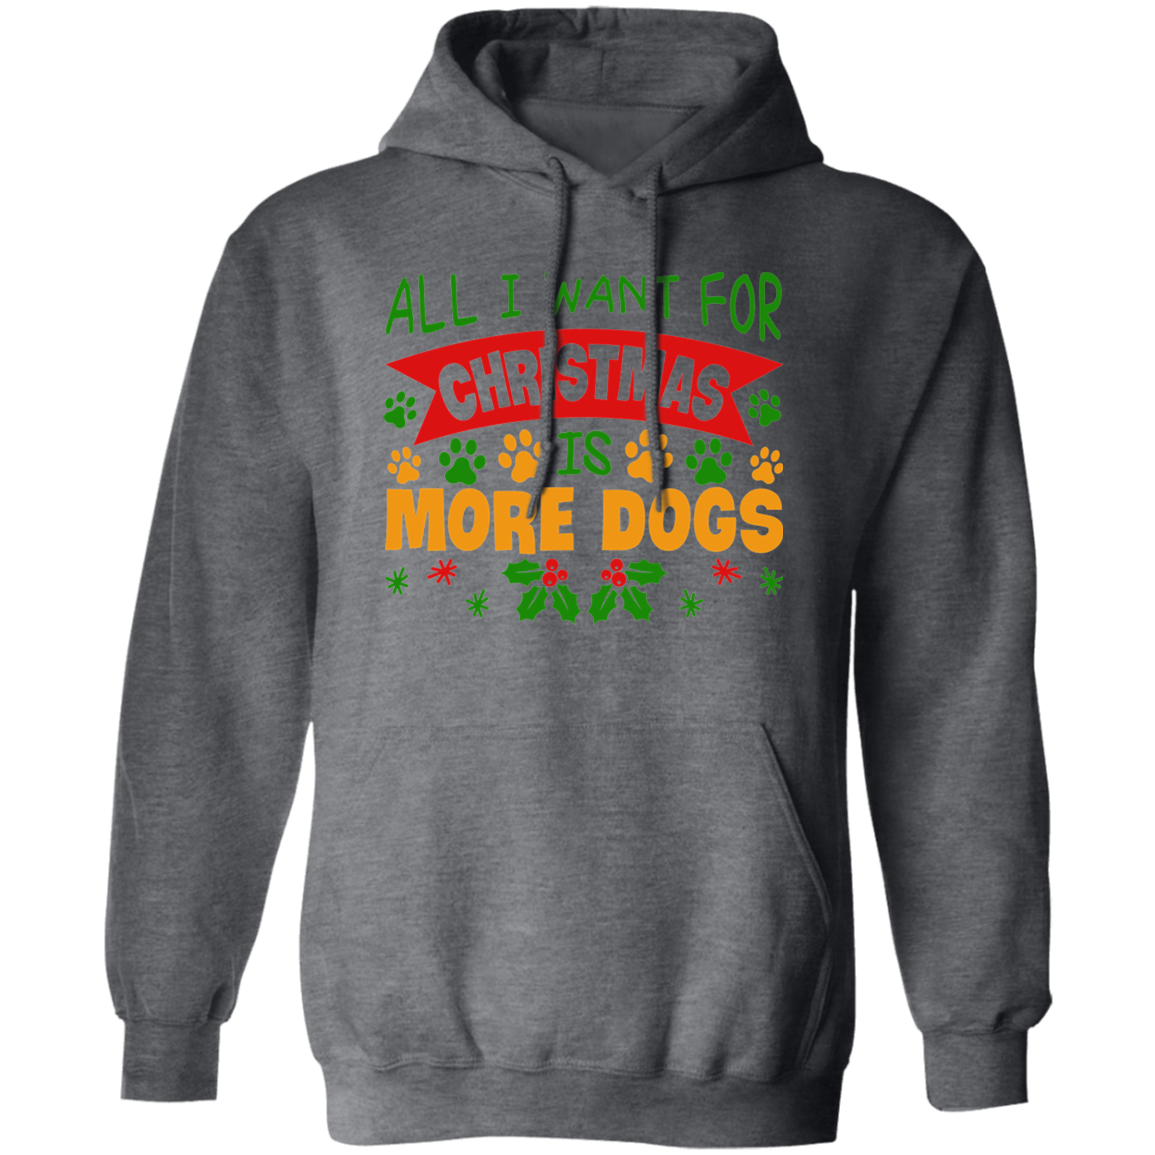 All I Want for Christmas is More Dogs Pullover Hoodie Hooded Sweatshirt